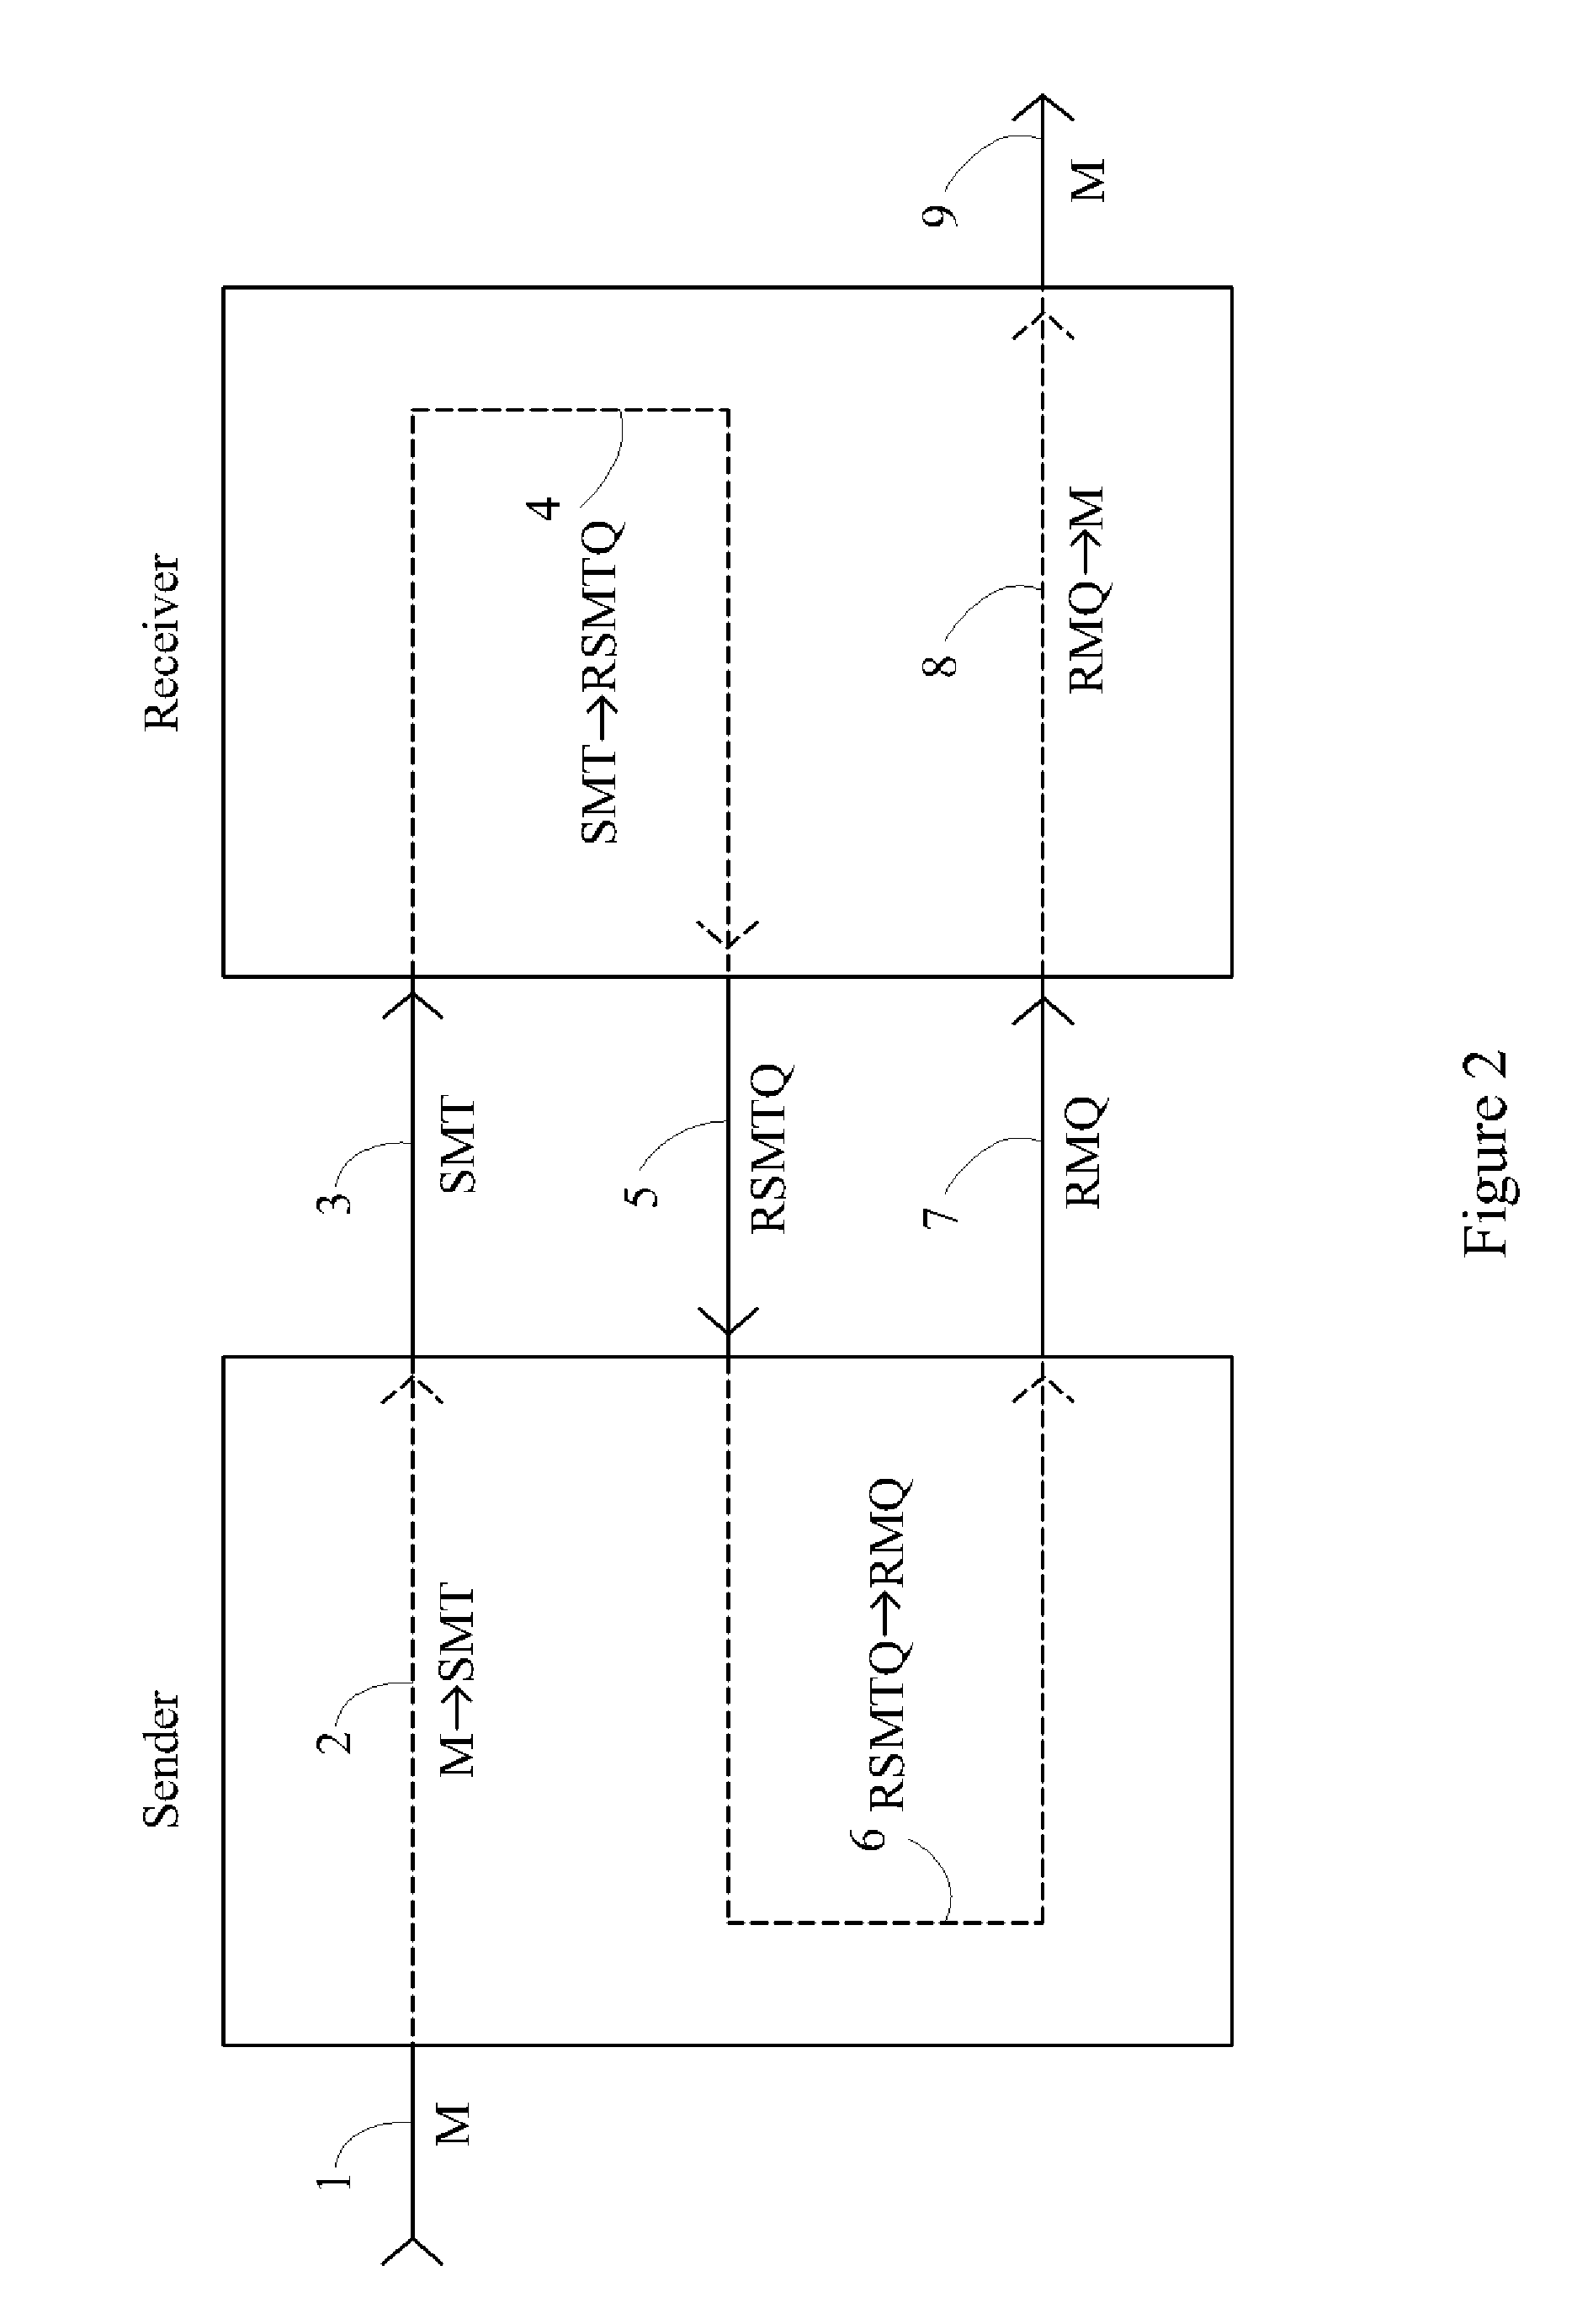 Device, System and Method for Fast Secure Message Encryption Without Key Distribution